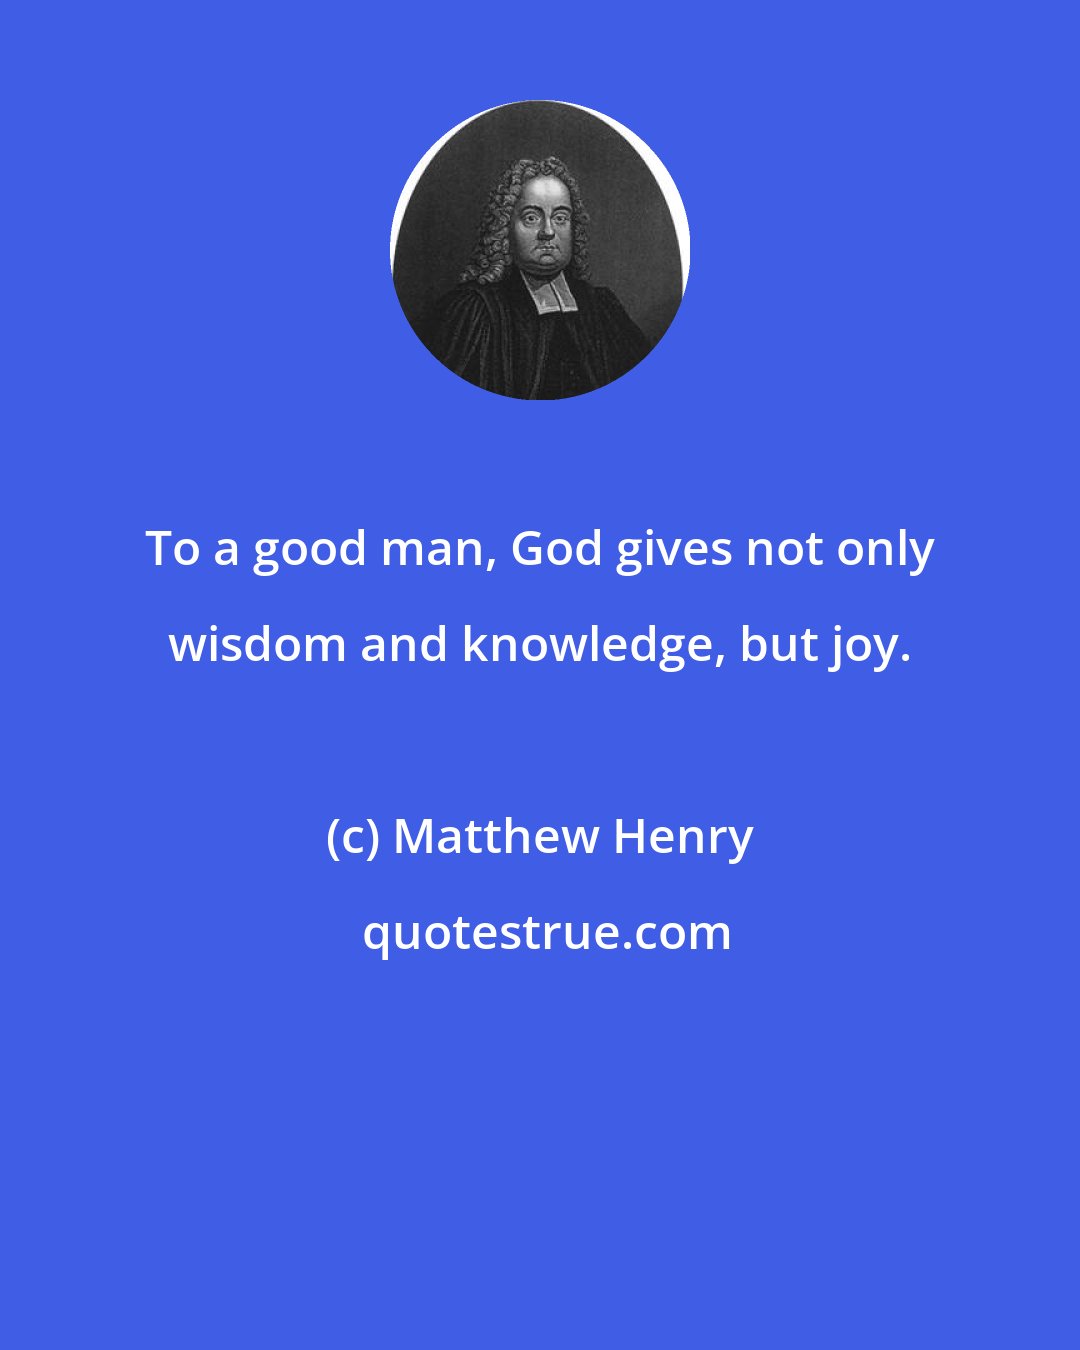 Matthew Henry: To a good man, God gives not only wisdom and knowledge, but joy.